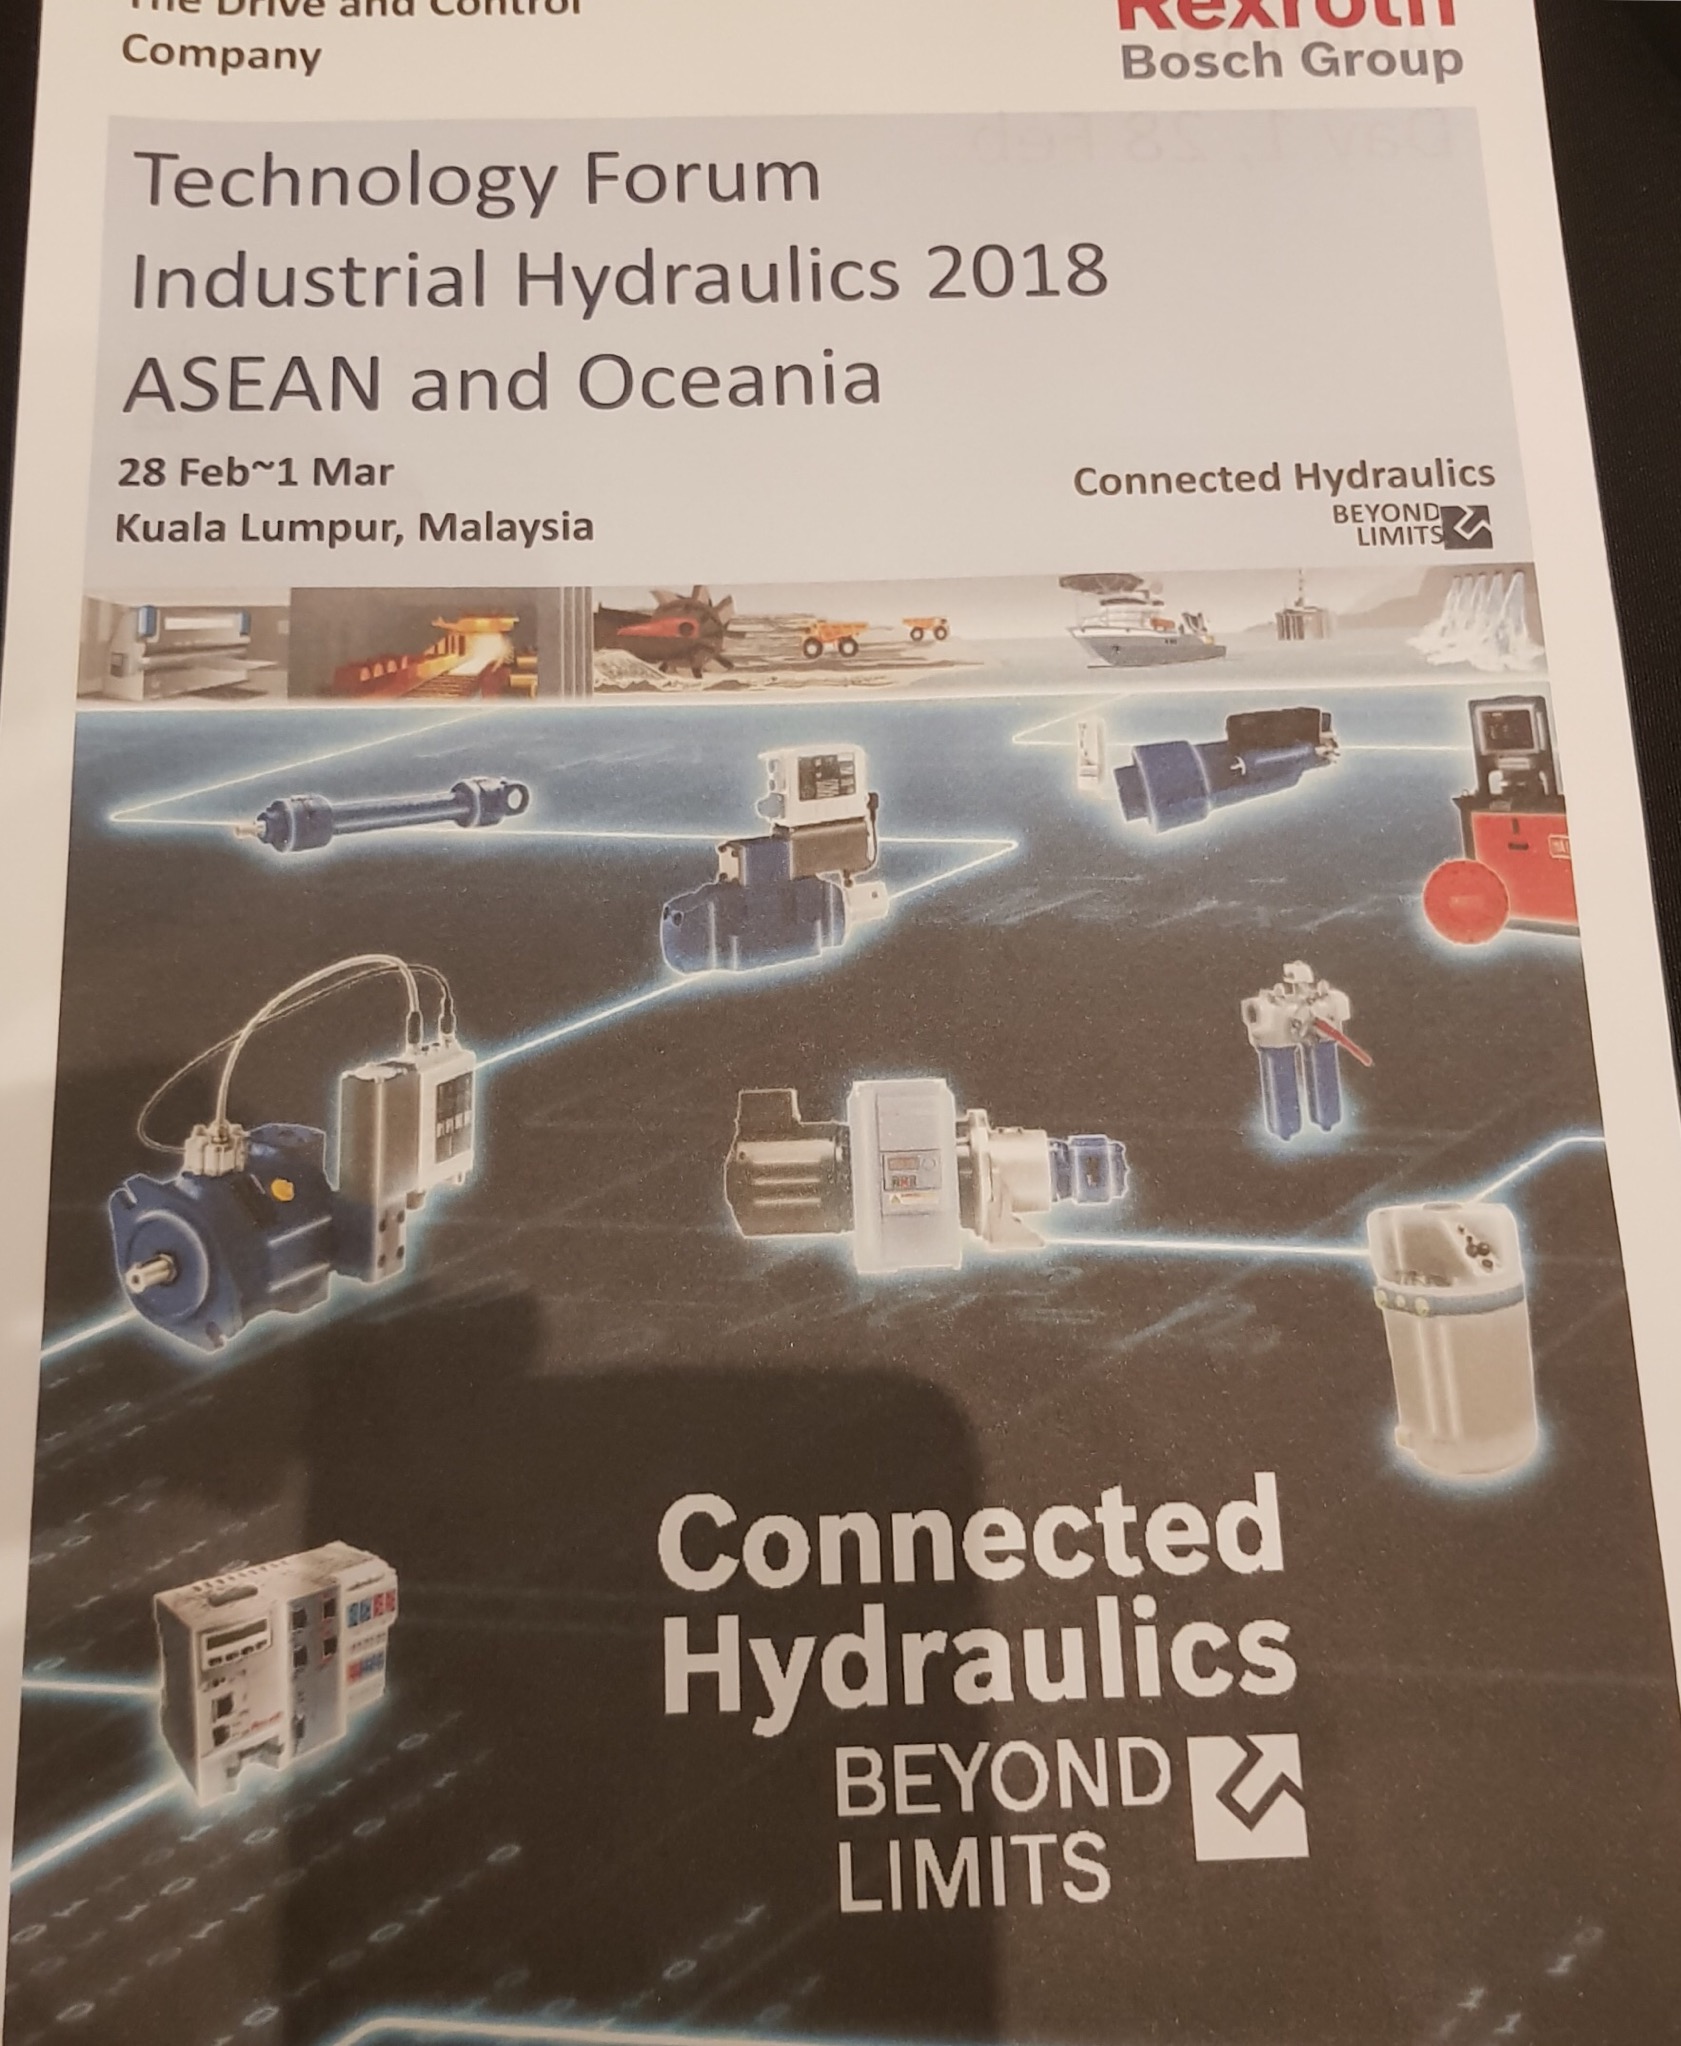 Bosch rexroth and connected hydraulics